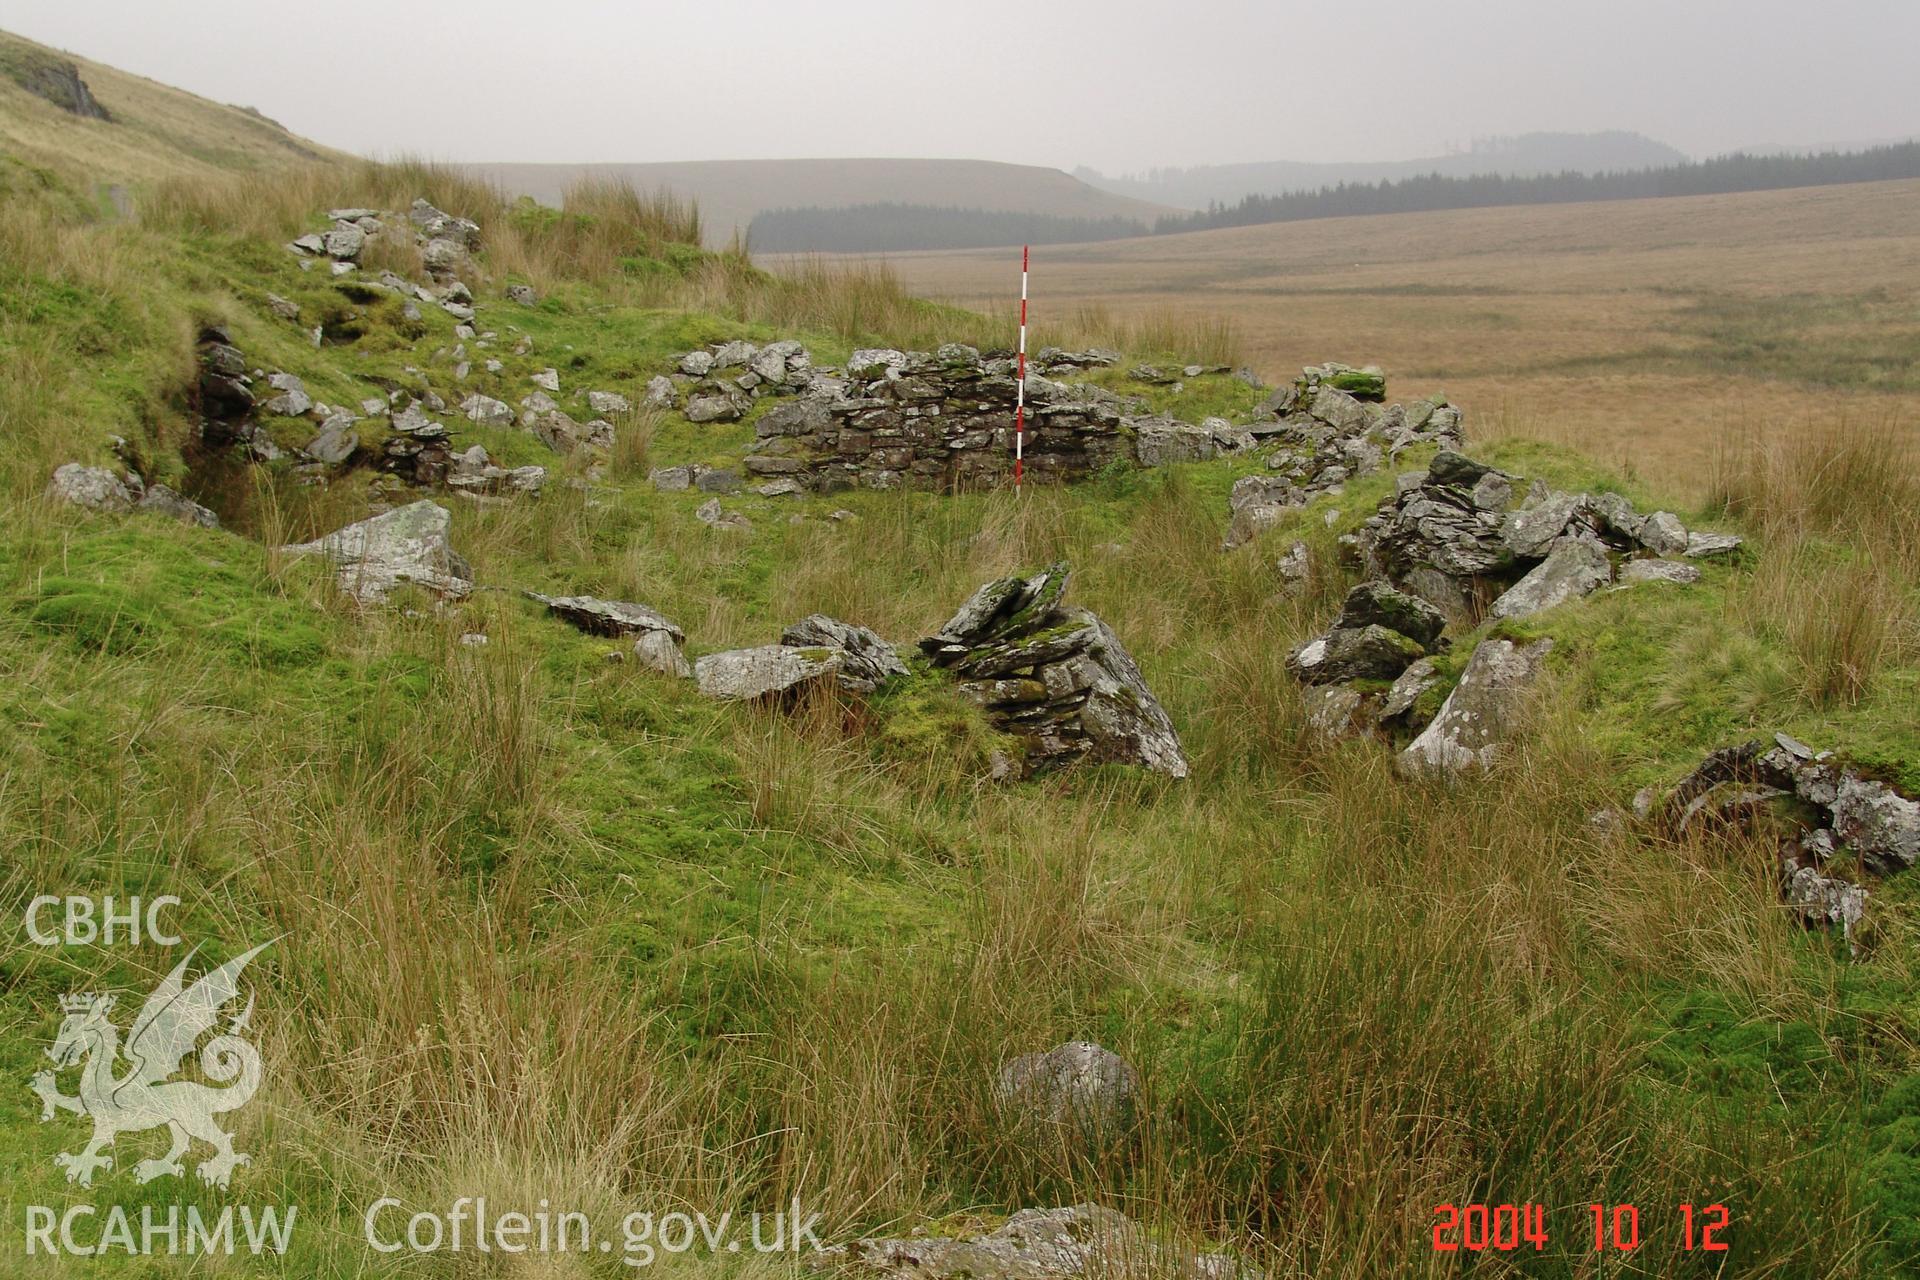 Photograph of Bwlch-y-styllen Building taken on 12/10/2004 by N. Phillips during an Upland Survey undertaken by Cambrian Archaeological Projects.